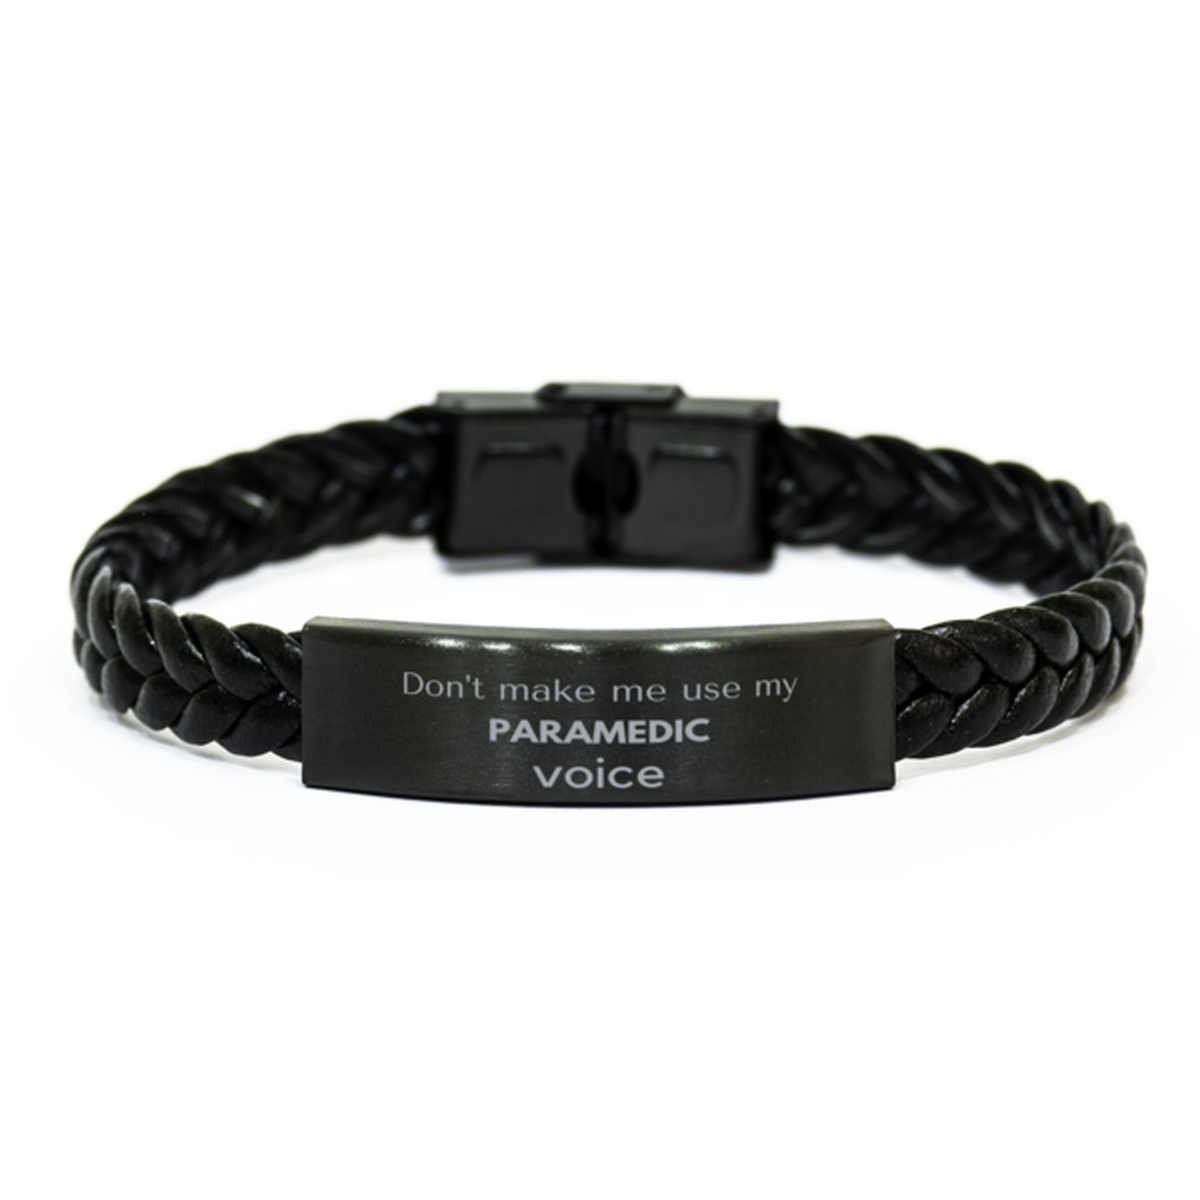 Don't make me use my Paramedic voice, Sarcasm Paramedic Gifts, Christmas Paramedic Braided Leather Bracelet Birthday Unique Gifts For Paramedic Coworkers, Men, Women, Colleague, Friends